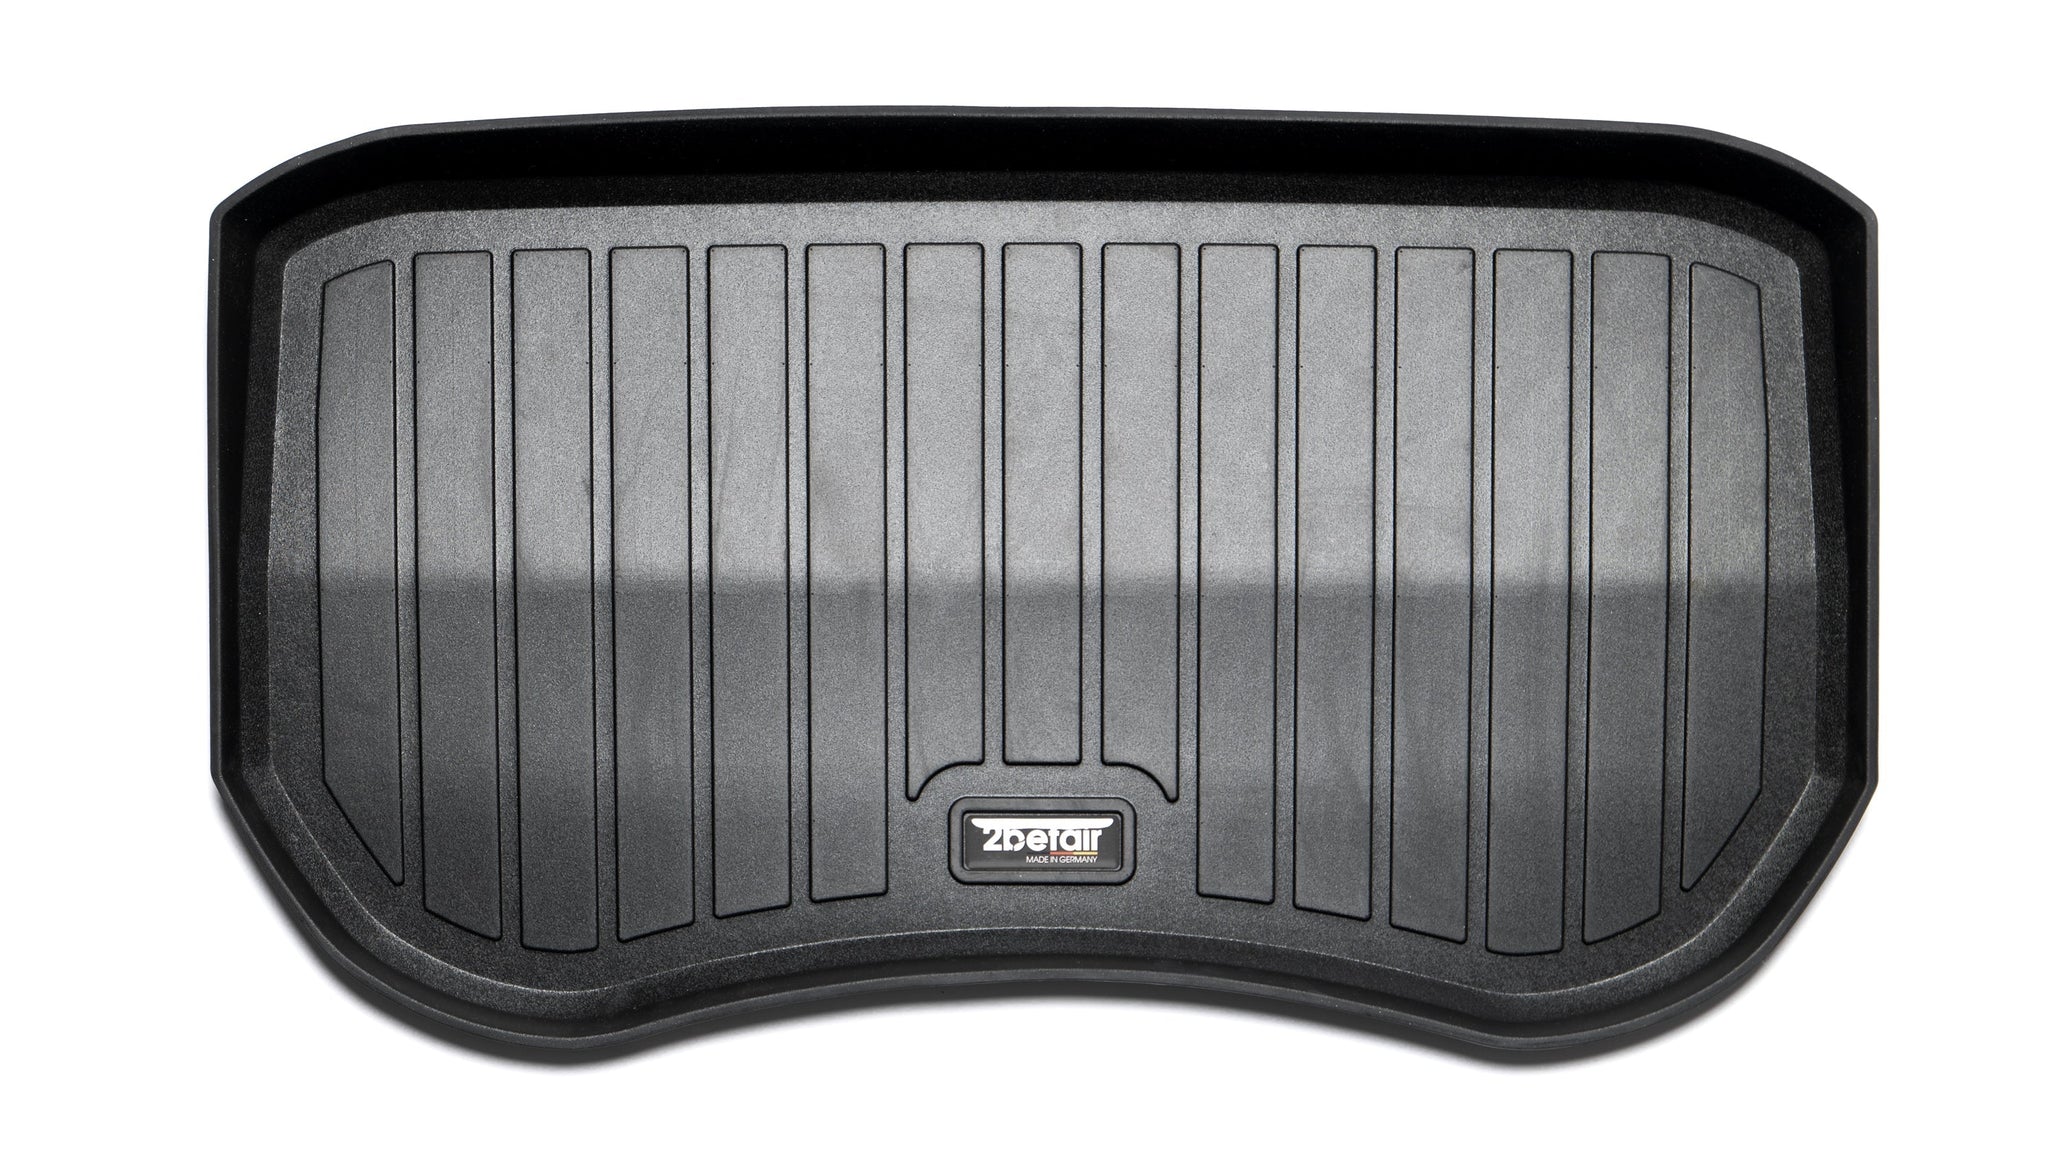 2befair rubber mats set trunk (rear and front) for the Tesla Model 3